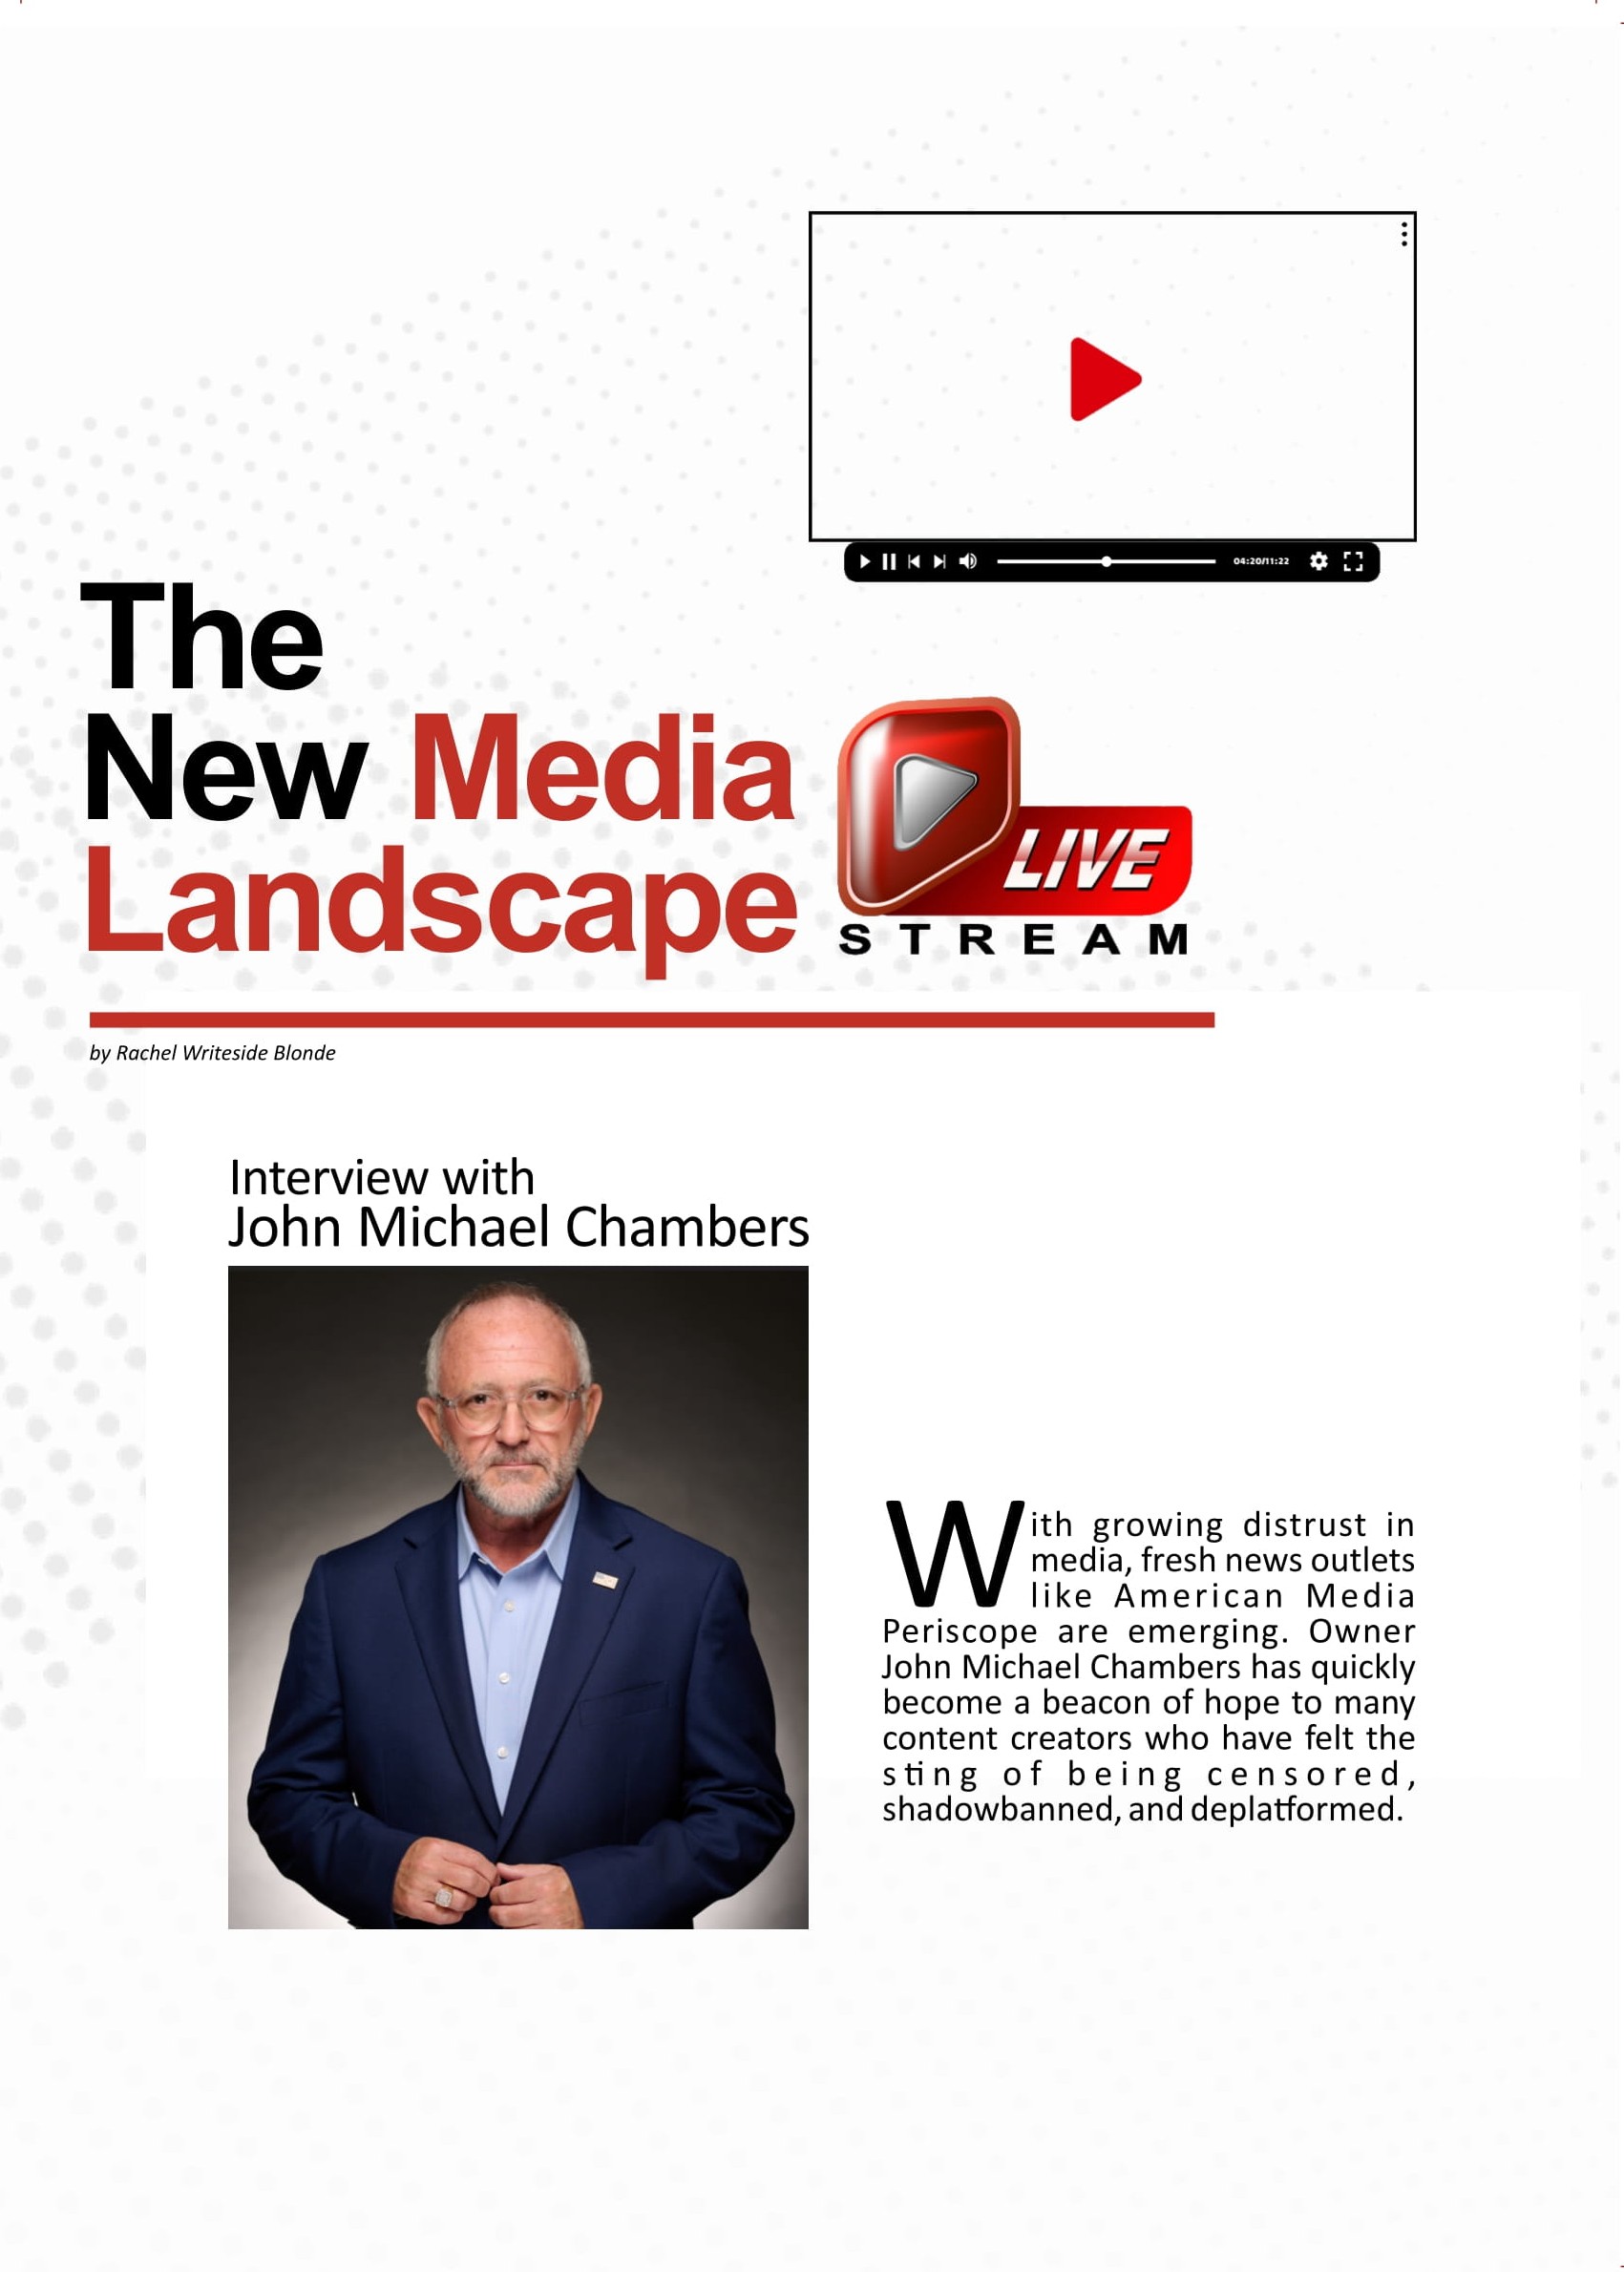 The New Media Landscape – Interview with John Michael Chambers  at george magazine